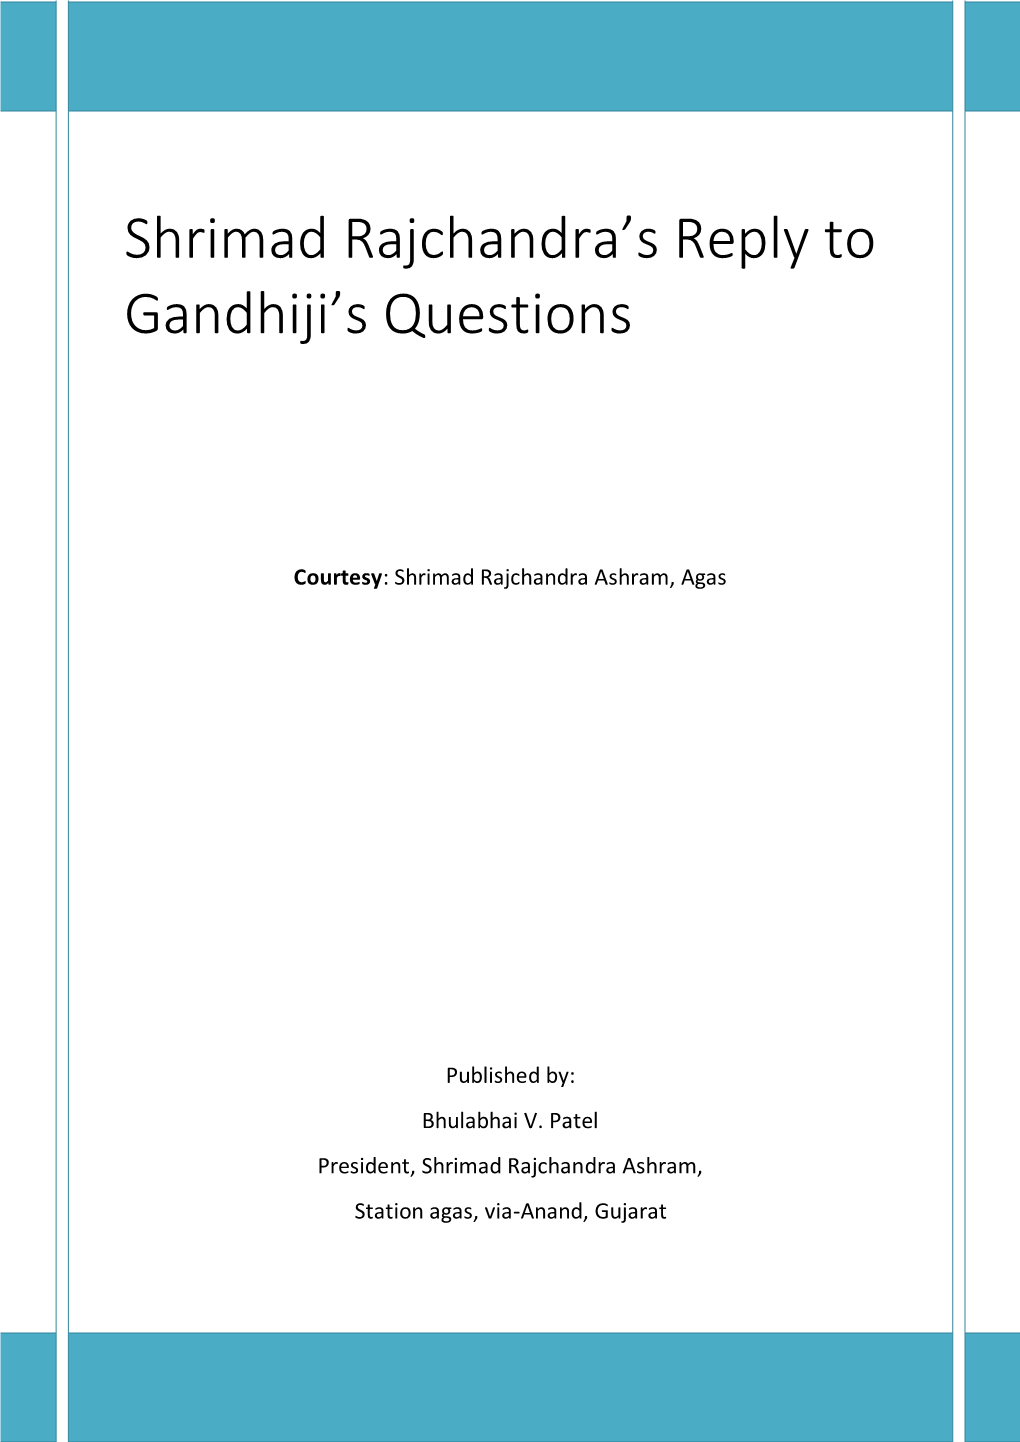 Shrimad Rajchandra's Reply to Gandhiji's Questions1